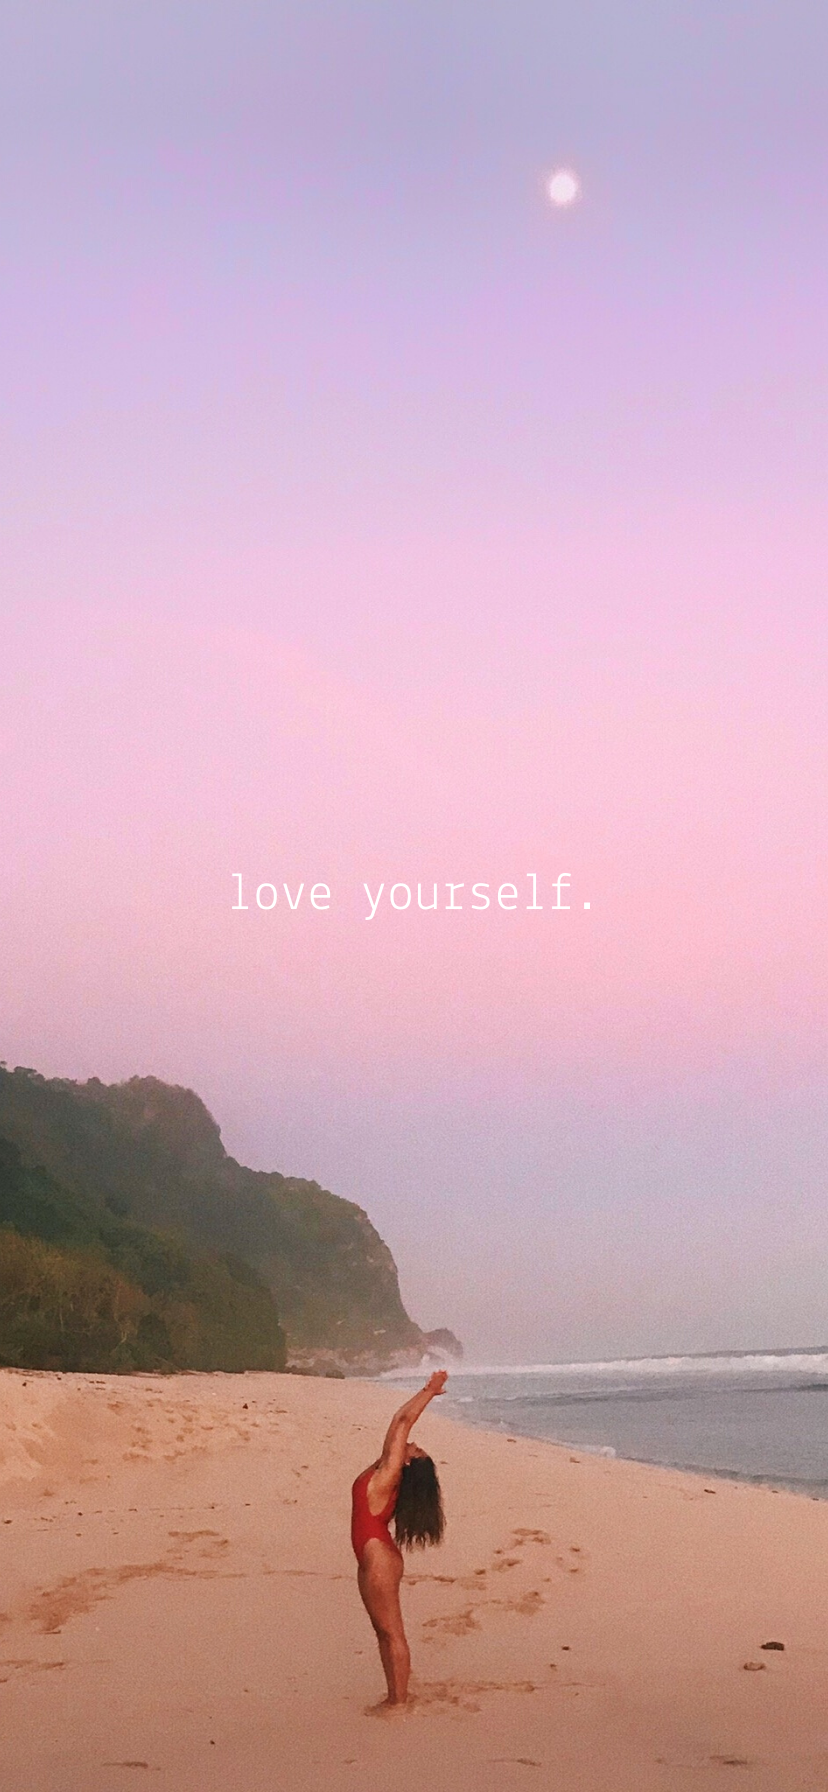 Self Love Wallpaper- Free Self Love Phone Background. Mary's Cup of Tea